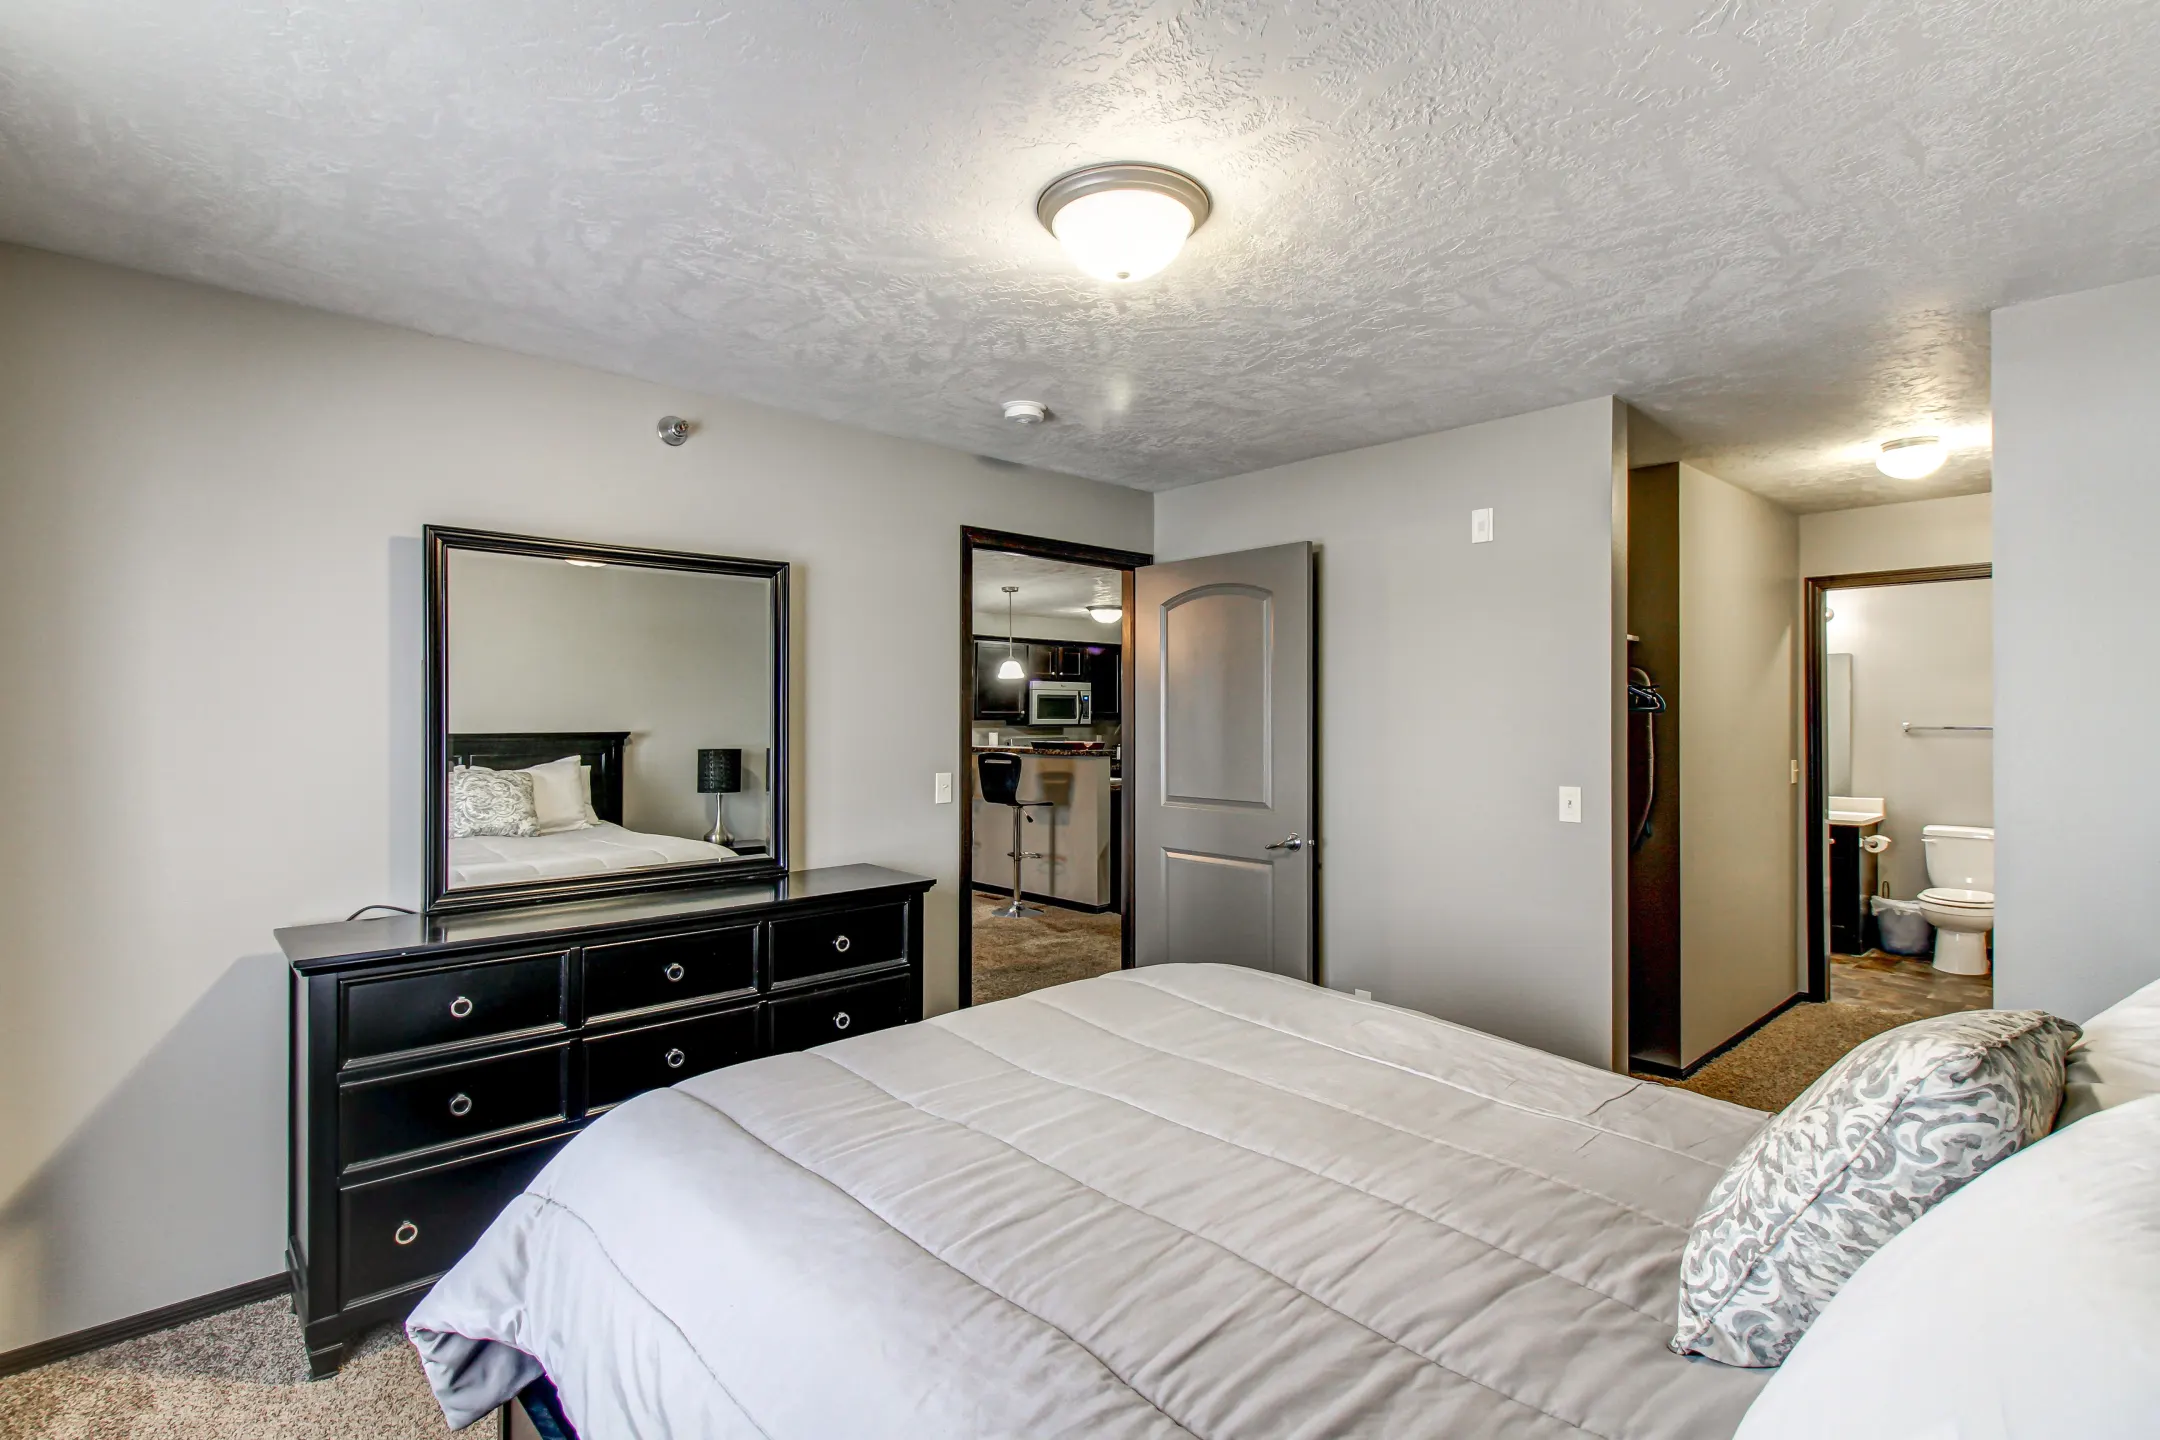 Bedroom - THE VILLAGE AT THREE FOUNTAINS - Sioux Falls, SD